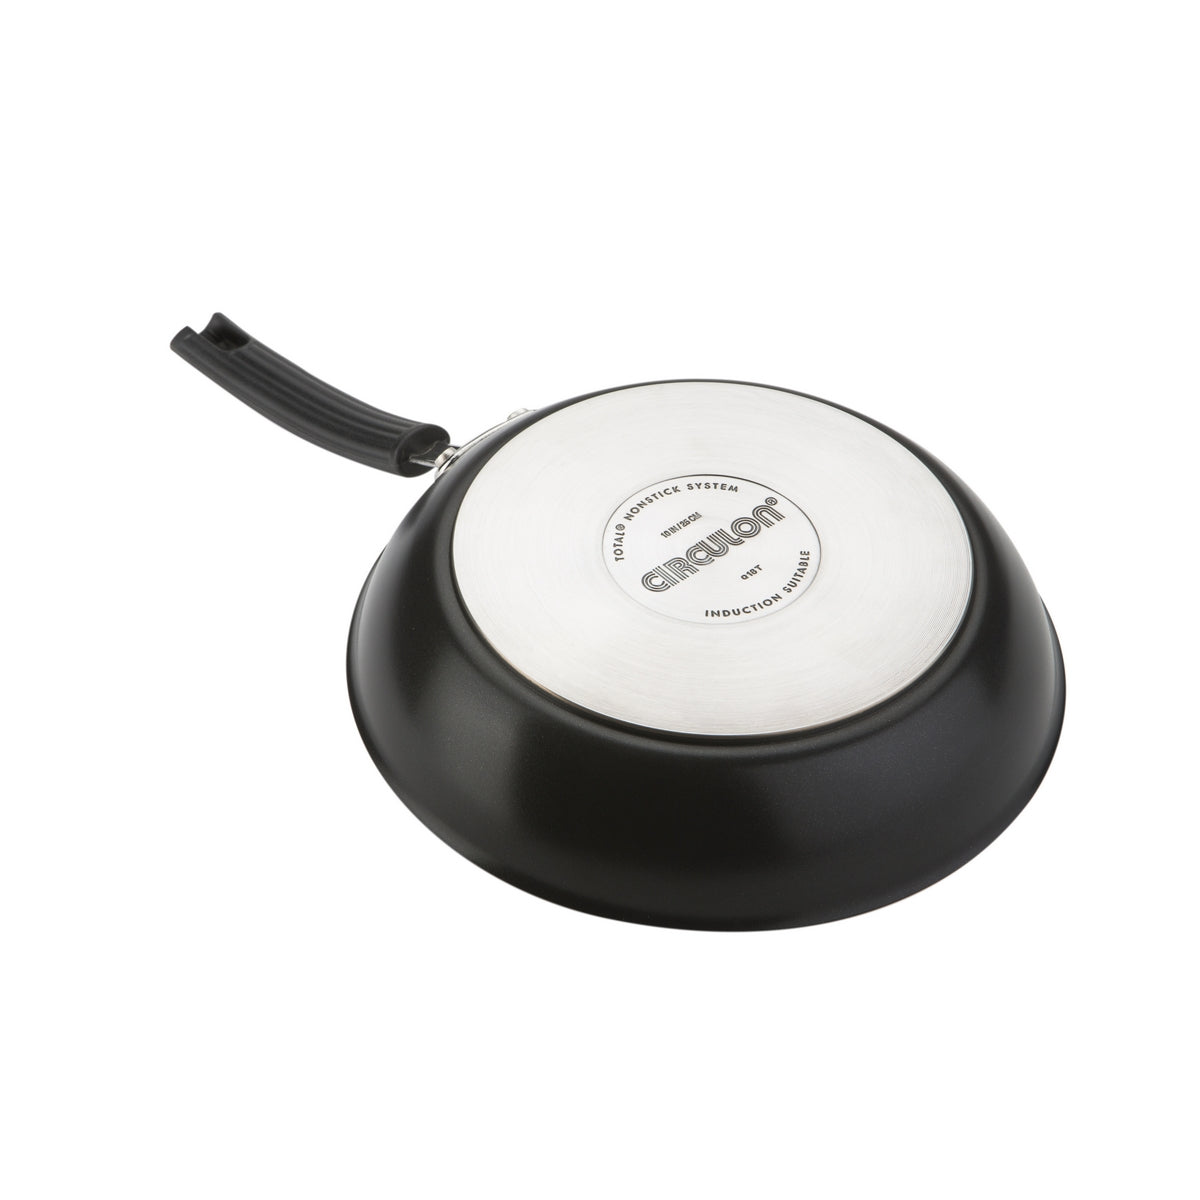 Total Non-Stick Induction Frying Pan Set - 3 Pieces